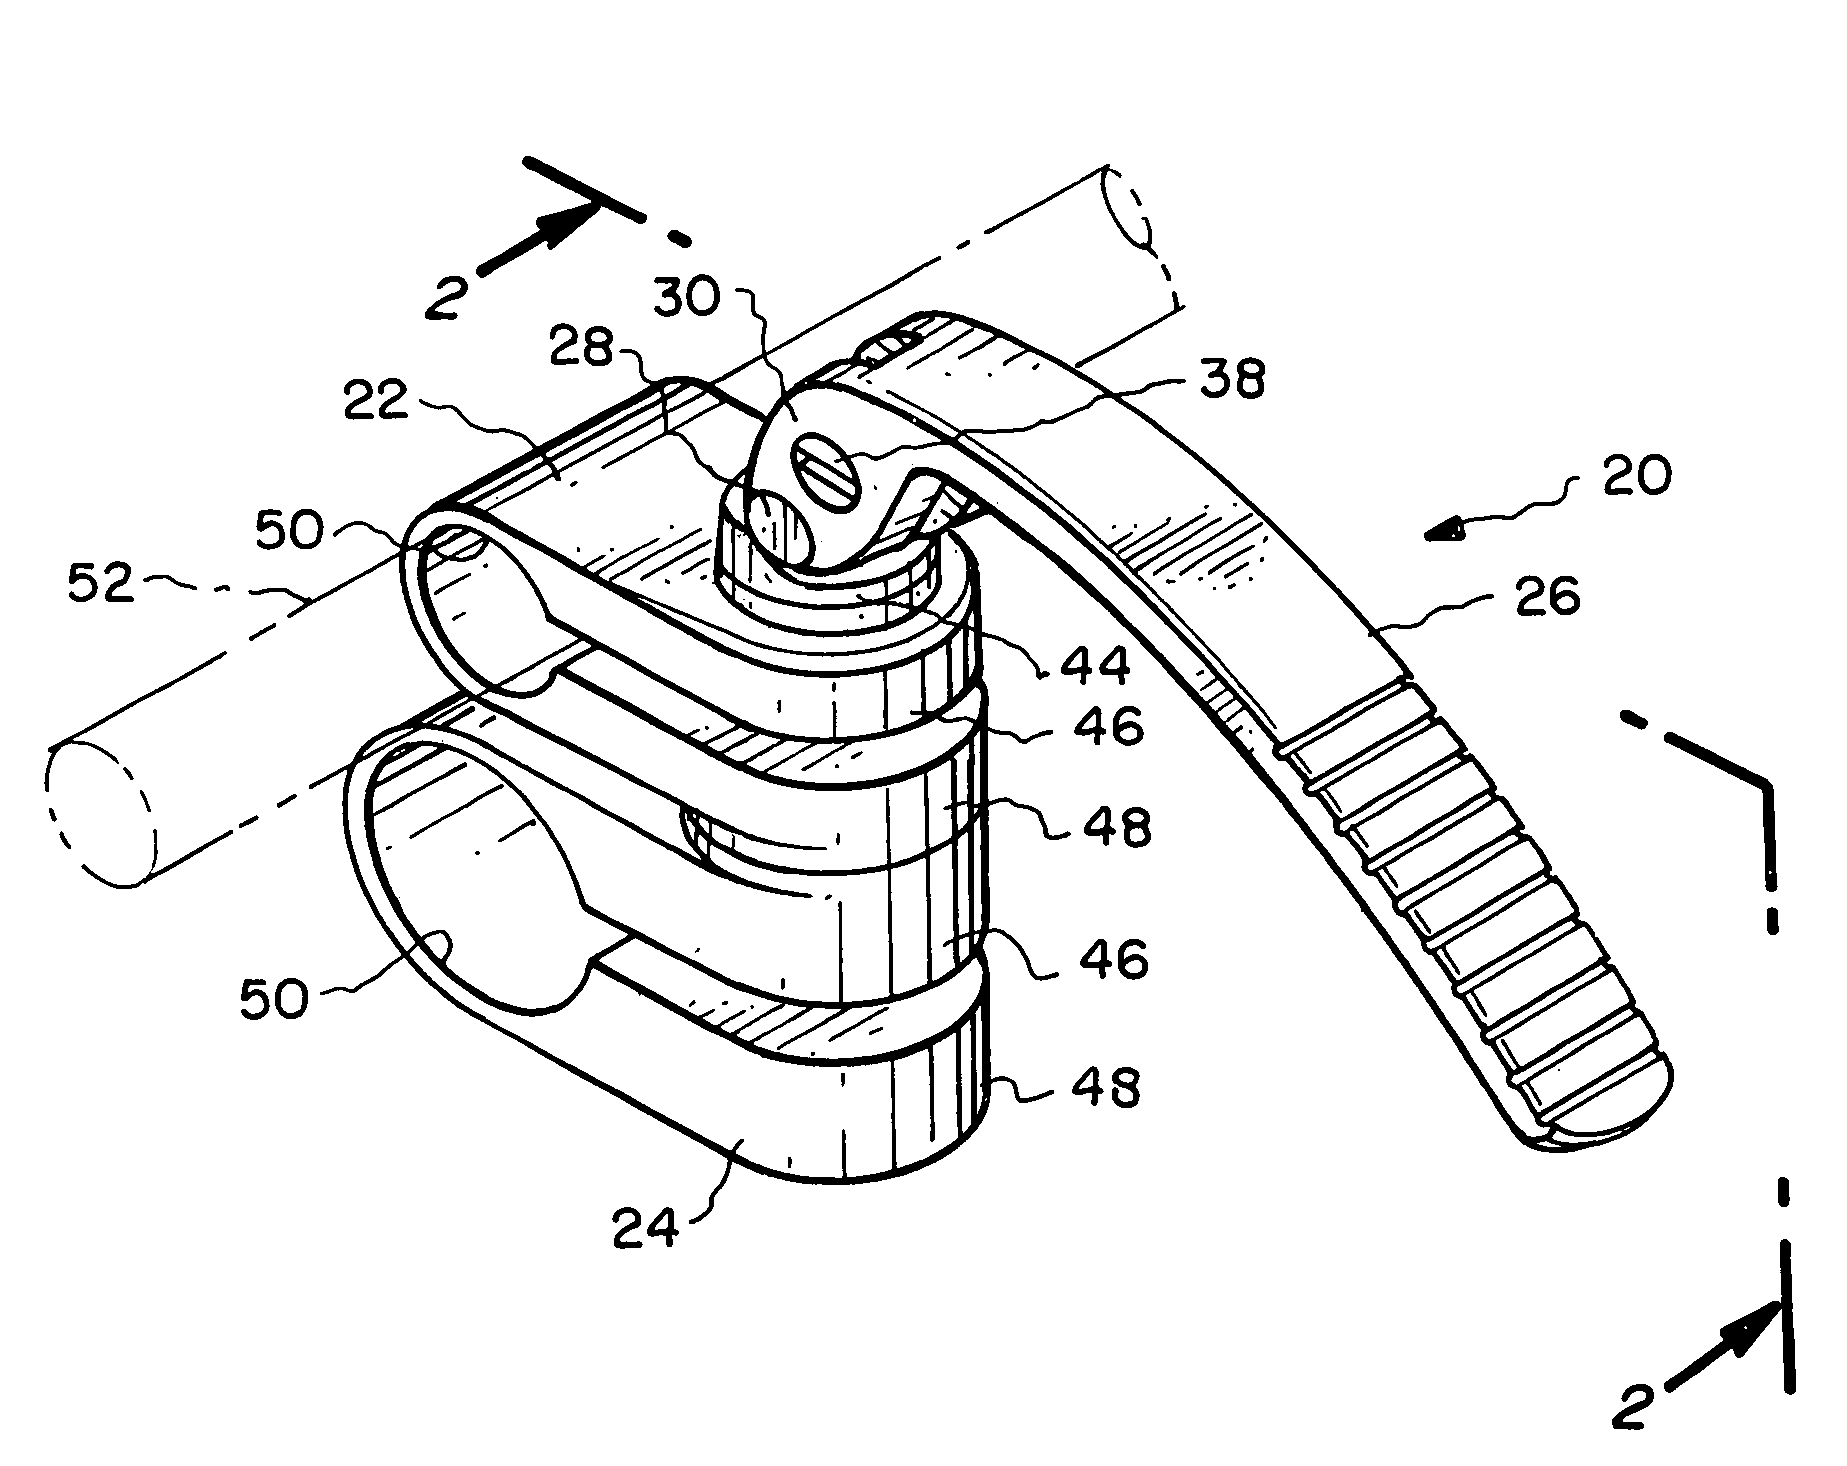 Multi-position locking mechanisms for clamping assemblies